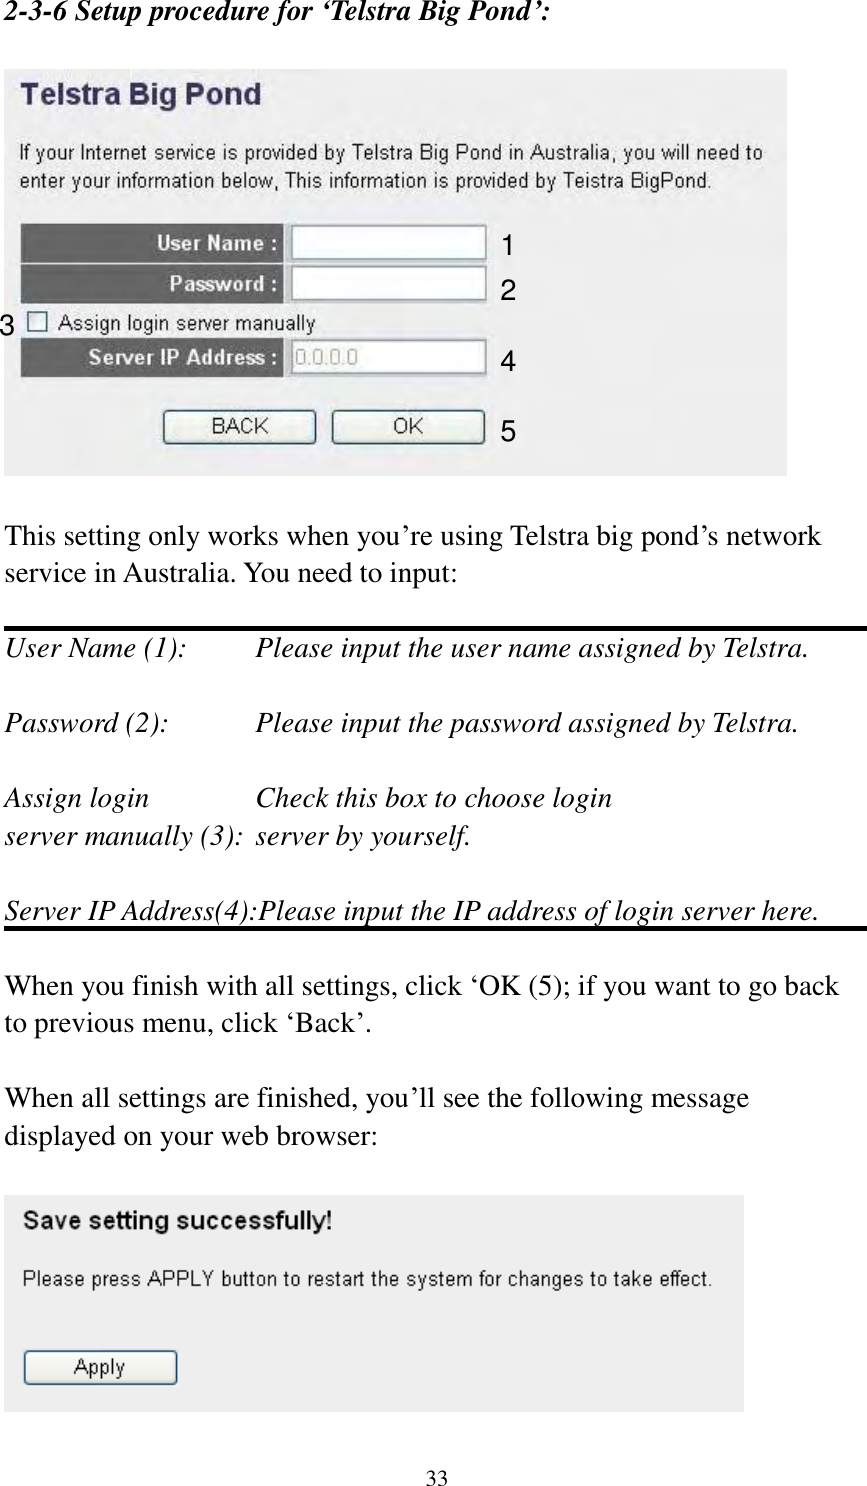 33 2-3-6 Setup procedure for ‘Telstra Big Pond’:    This setting only works when you‟re using Telstra big pond‟s network service in Australia. You need to input:  User Name (1):     Please input the user name assigned by Telstra.  Password (2):      Please input the password assigned by Telstra.  Assign login      Check this box to choose login server manually (3): server by yourself.  Server IP Address(4):Please input the IP address of login server here.  When you finish with all settings, click „OK (5); if you want to go back to previous menu, click „Back‟.  When all settings are finished, you‟ll see the following message displayed on your web browser:   1 2 3 4 5 